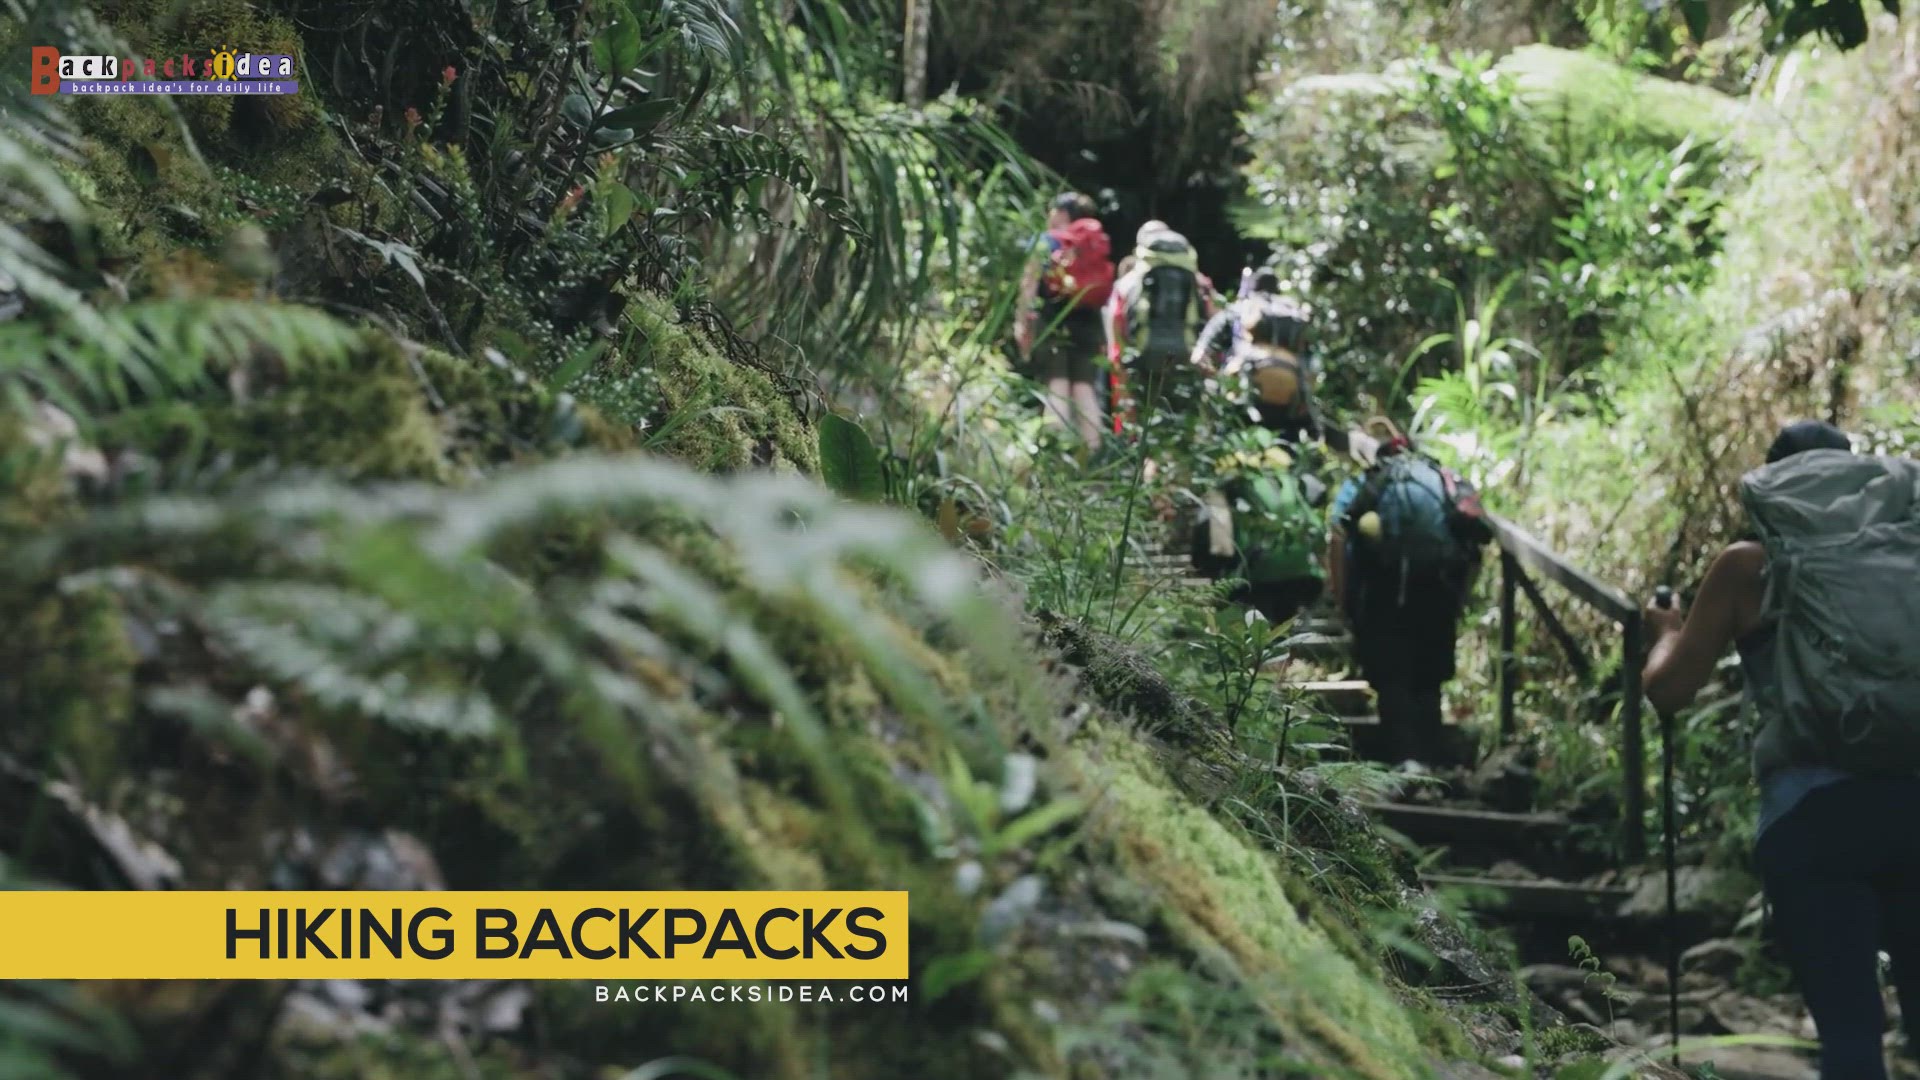 'Video thumbnail for backpacks for your every adventure trip'